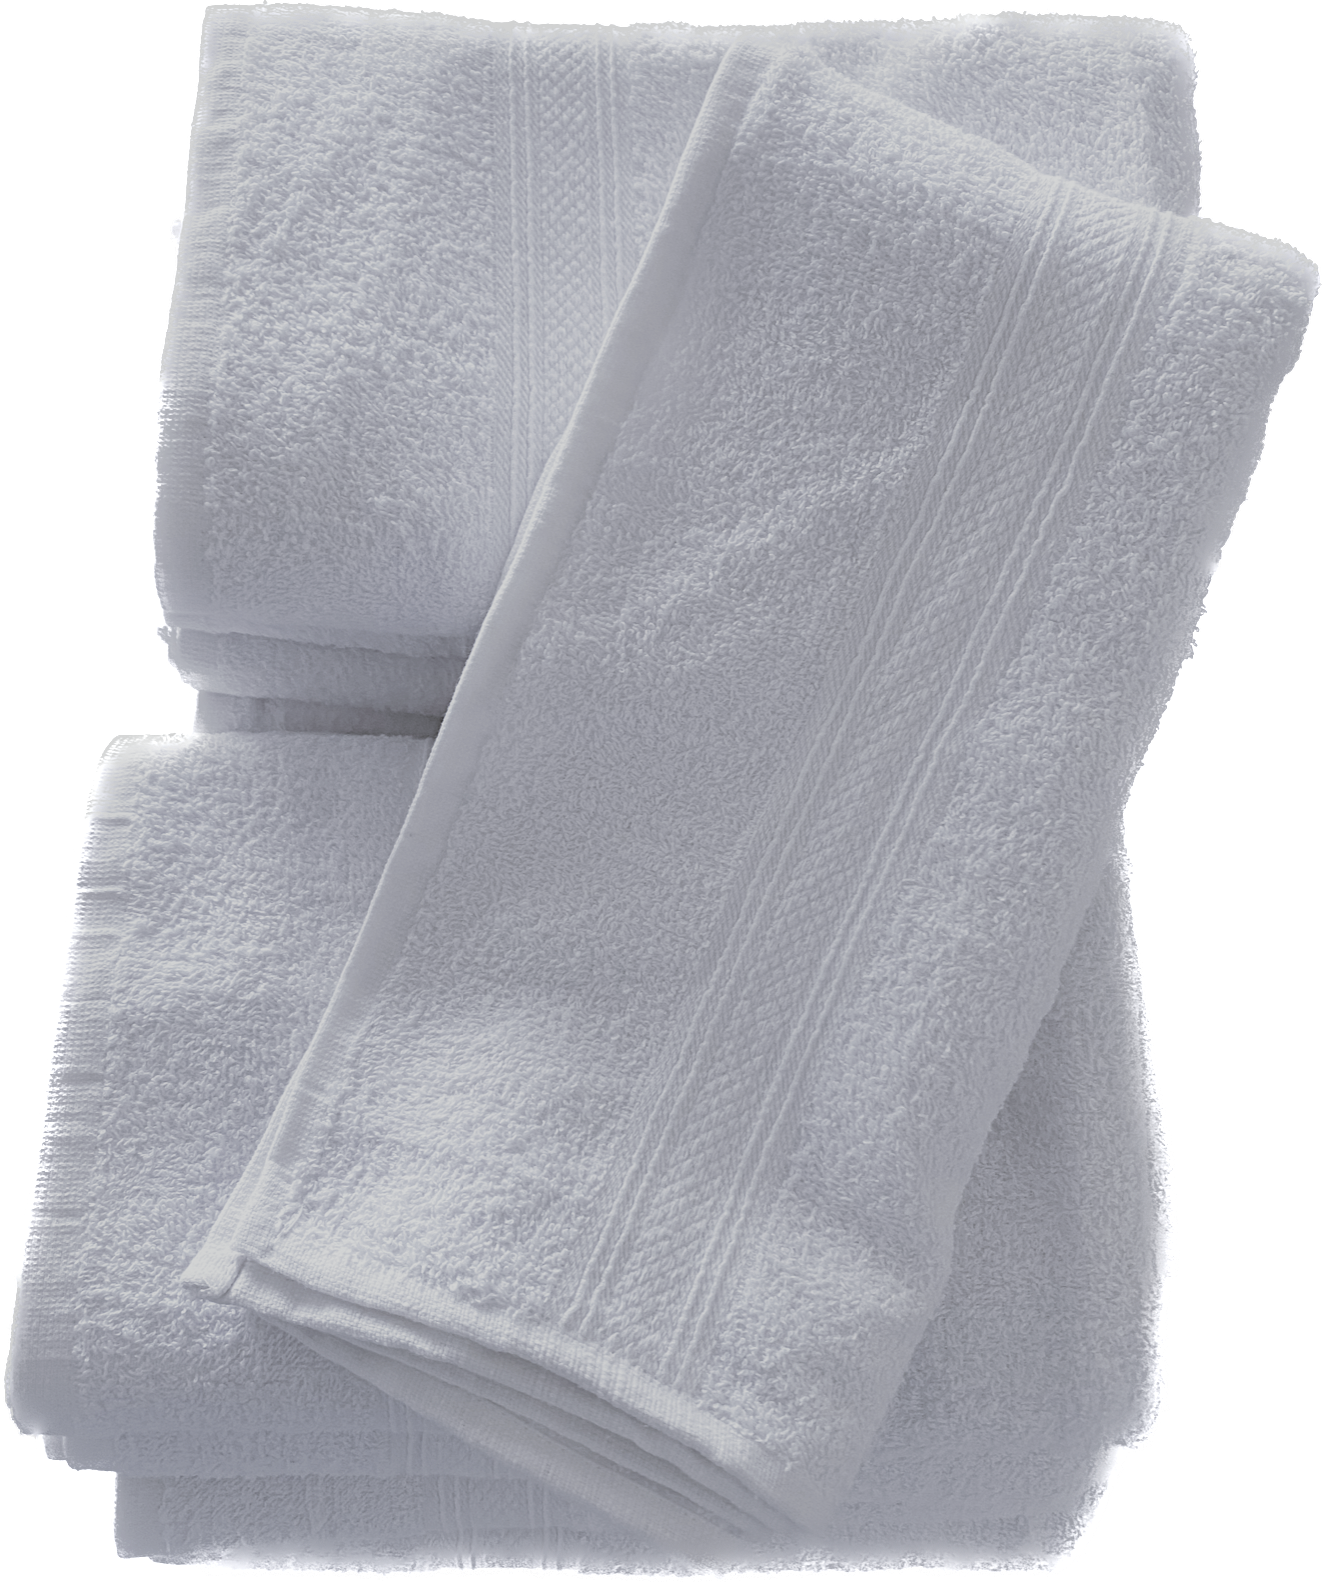 12 Pack Luxury Hotel Bath Towels 27x52 High Quality Soft Ring Spun Cot –  Towels N More